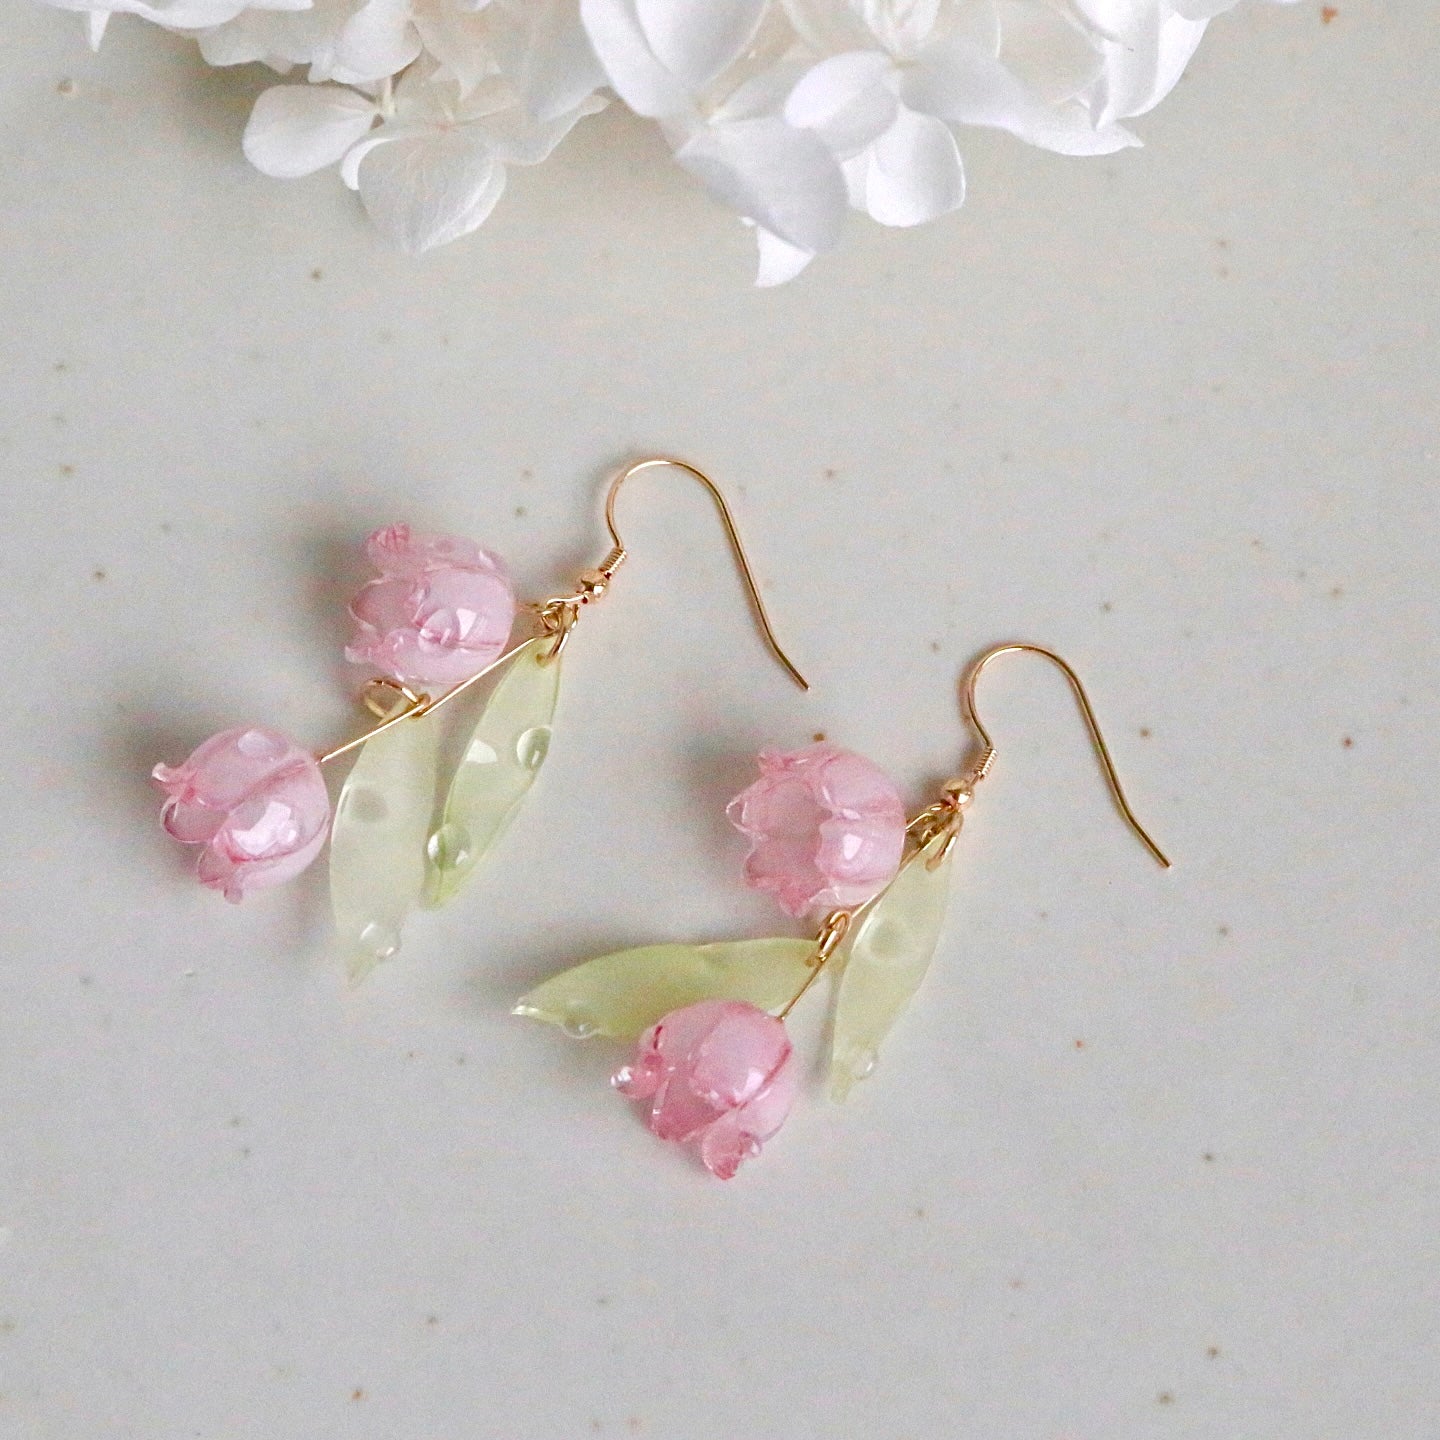 Shrink Plastic Lily Of The Valley Earrings